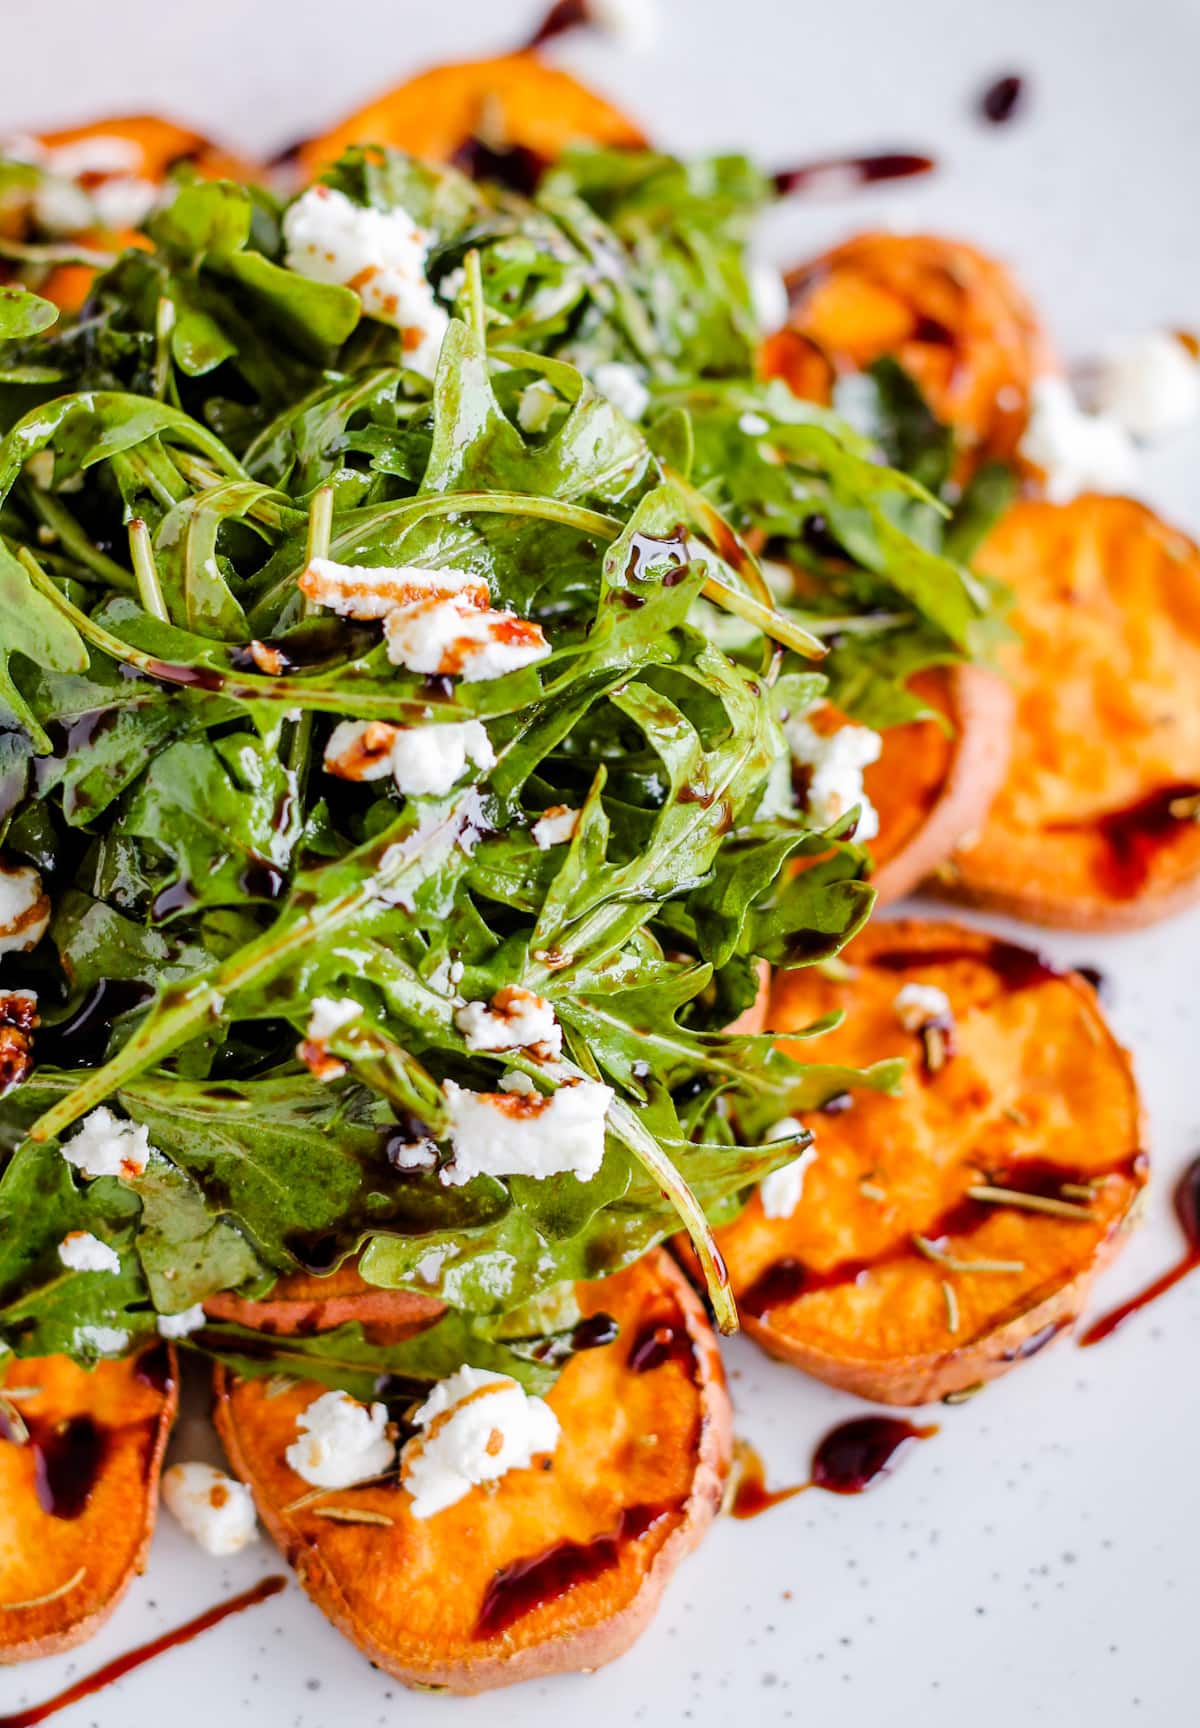 A plate with arugula salad topped with crumbled goat cheese served on top of roasted sweet potatoes and drizzled with balsamic glaze